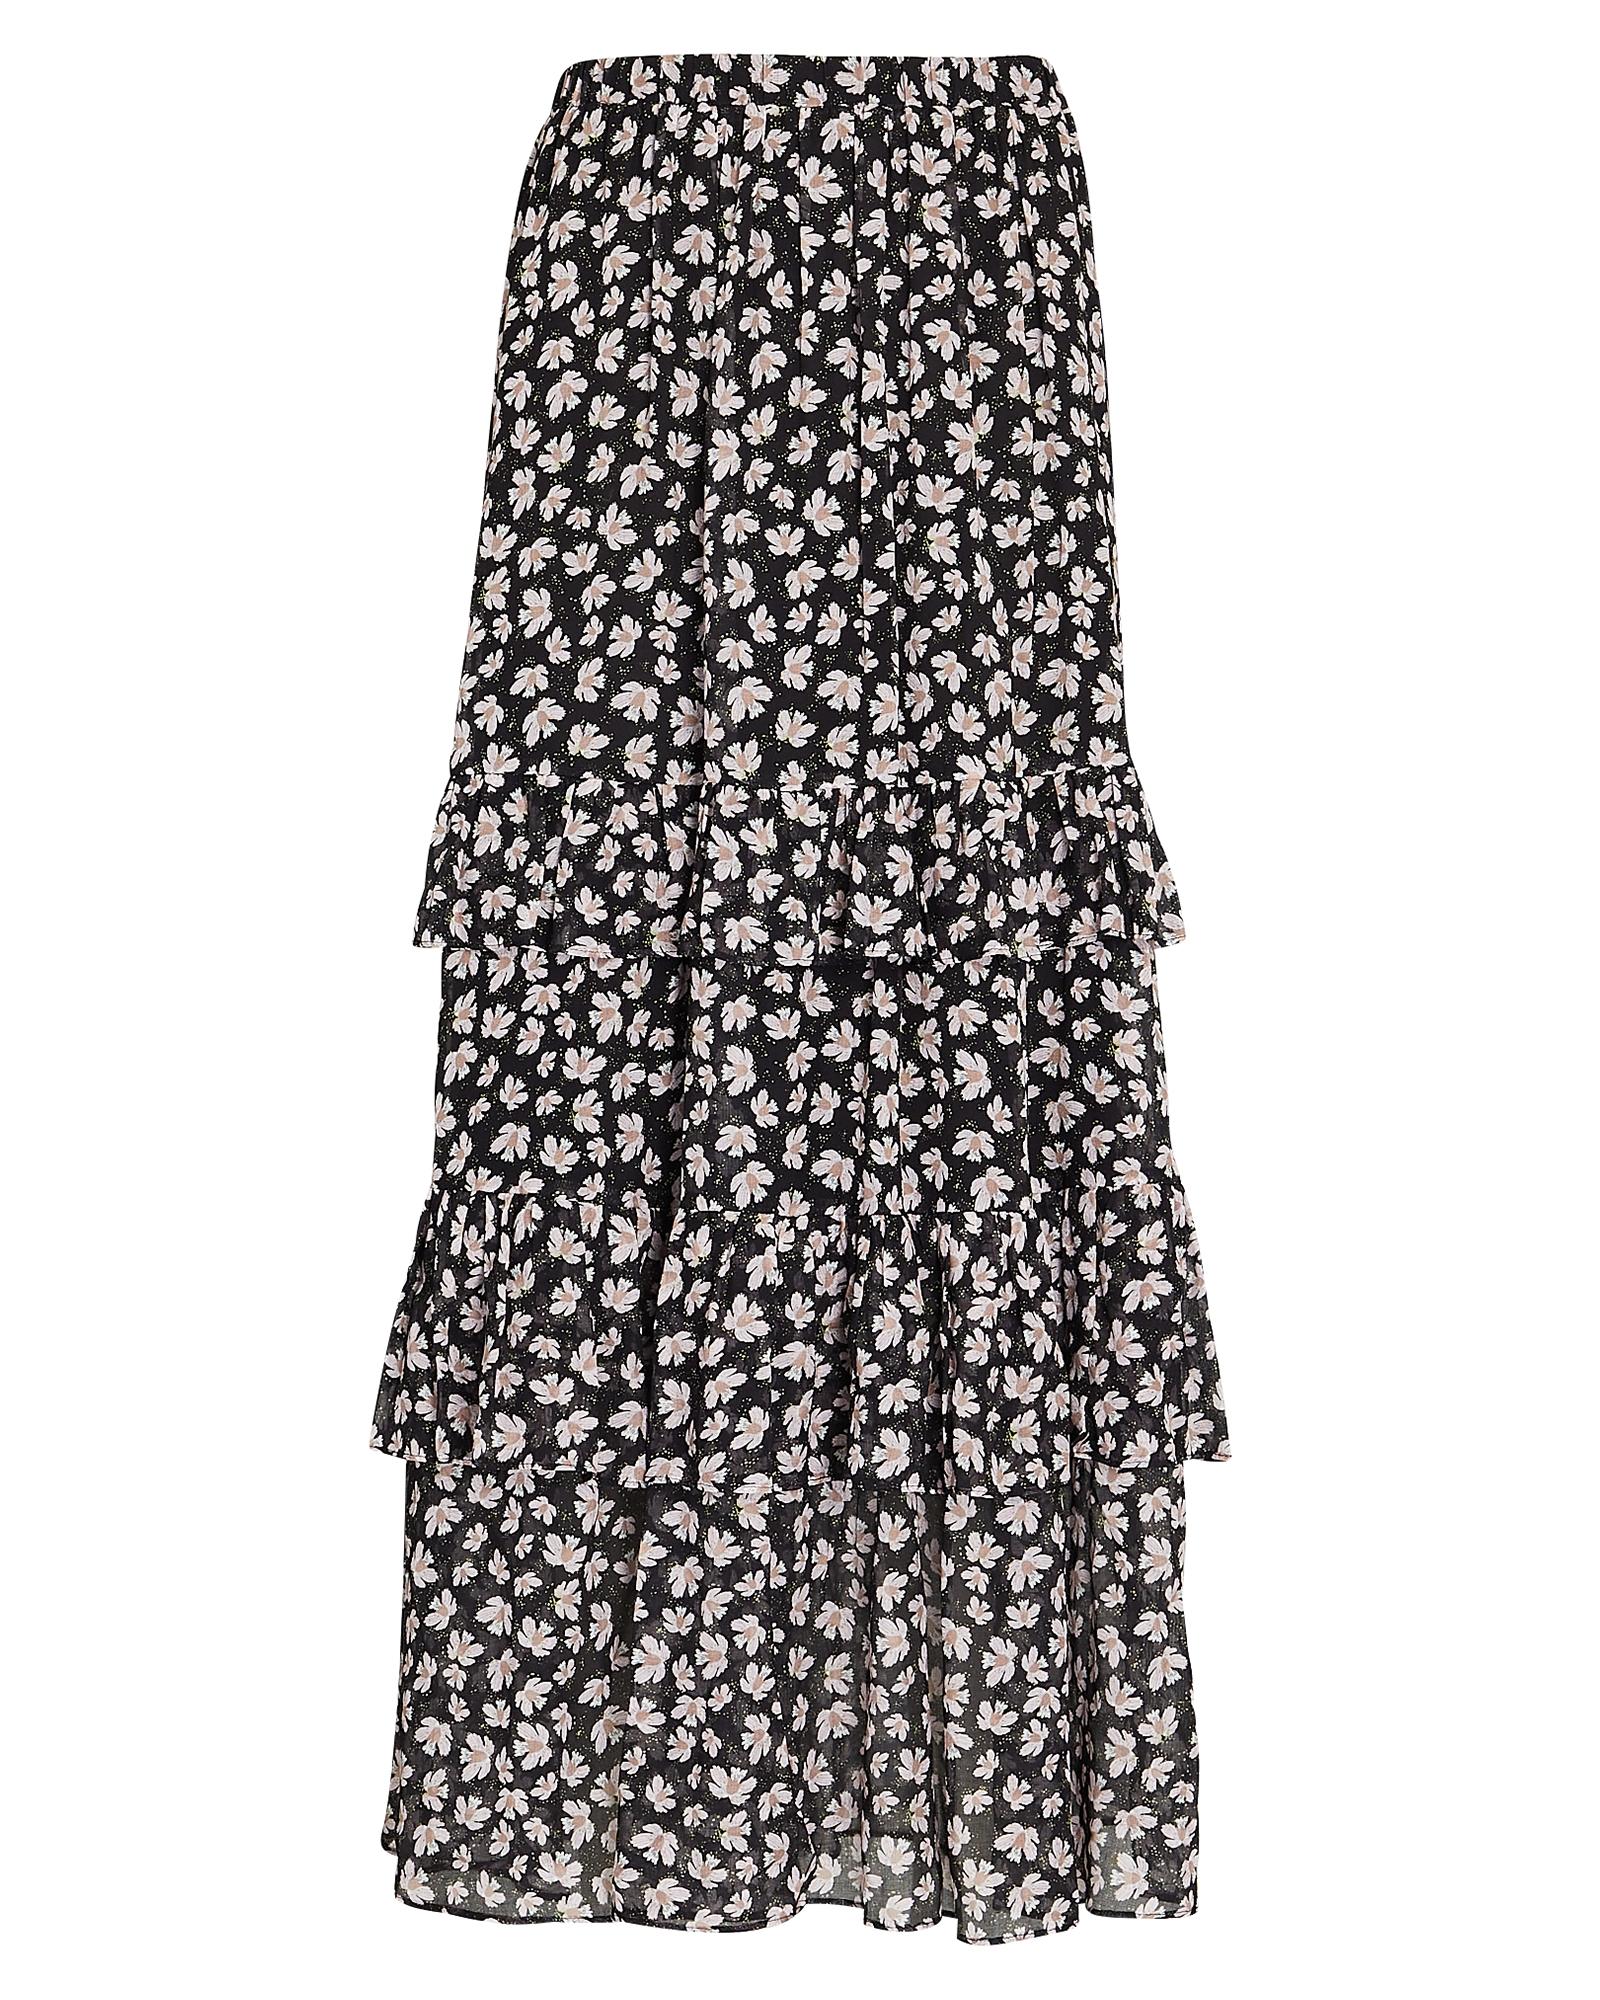 Intermix Odette Ruffled Floral Maxi Skirt in Black | Lyst